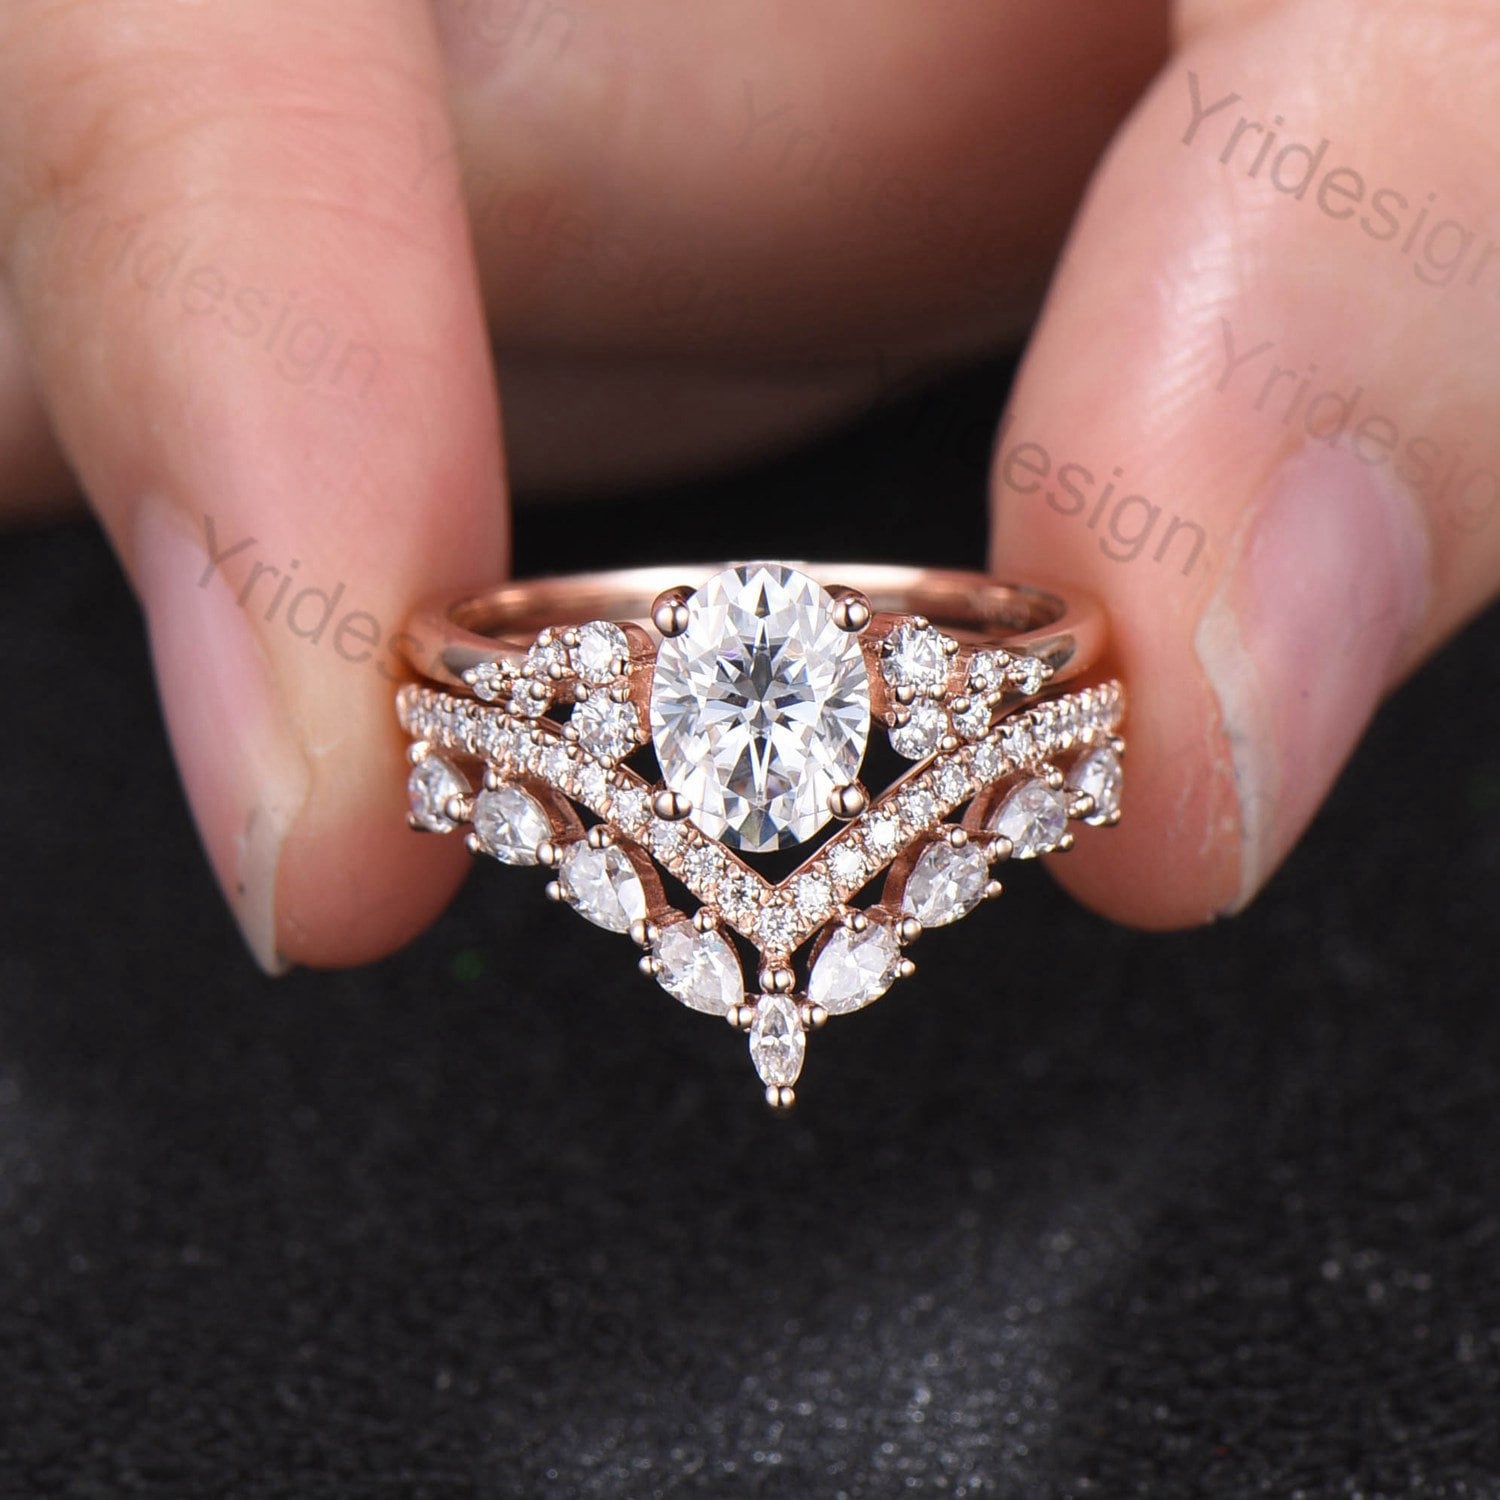 Wedding Trendy Fancy Rose Gold Diamond Ring for Women''s at Rs 15000/piece  in Surat